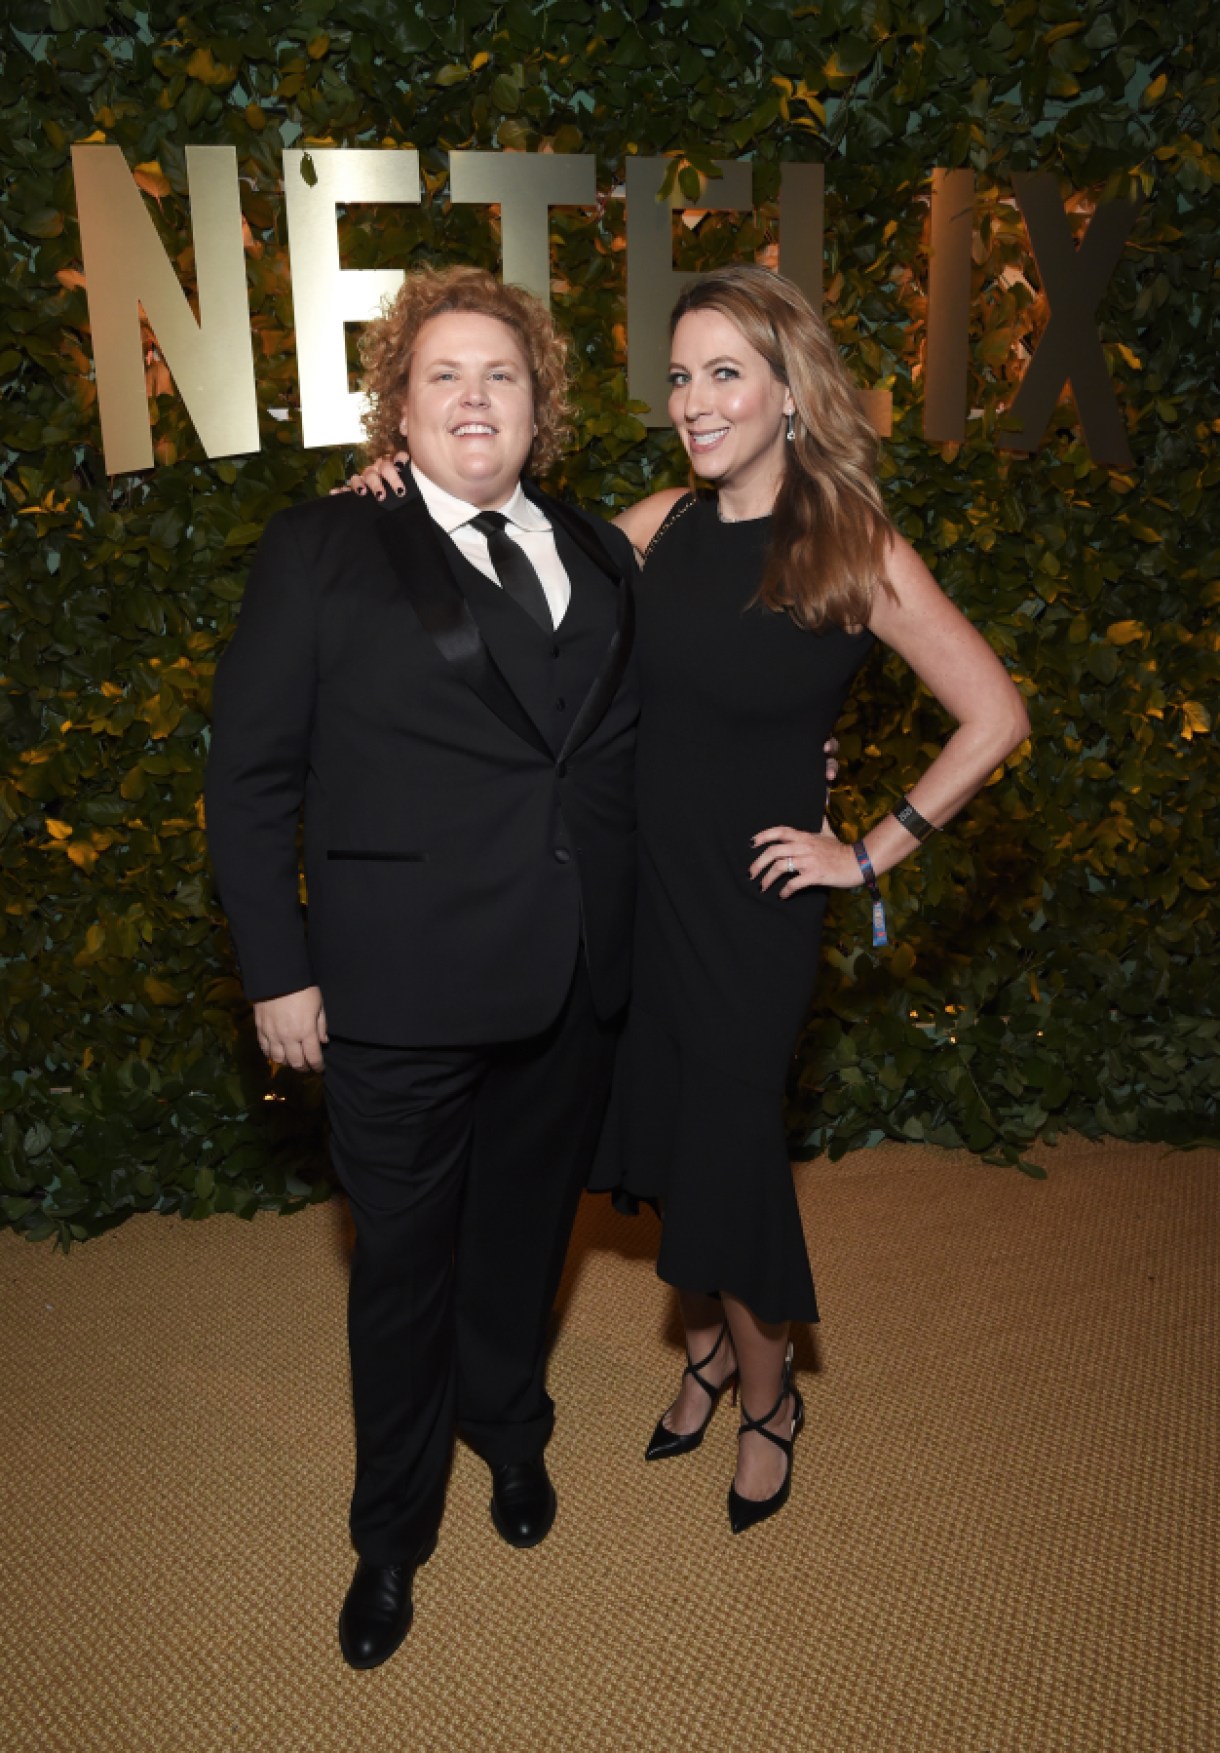 LOS ANGELES, CALIFORNIA - JANUARY 05: Fortune Feimster (L) and Jacquelyn Smith attend the Netflix 2020 Golden Globes After Party on January 05, 2020 in Los Angeles, California. (Photo by Michael Kovac/Getty Images for Netflix)